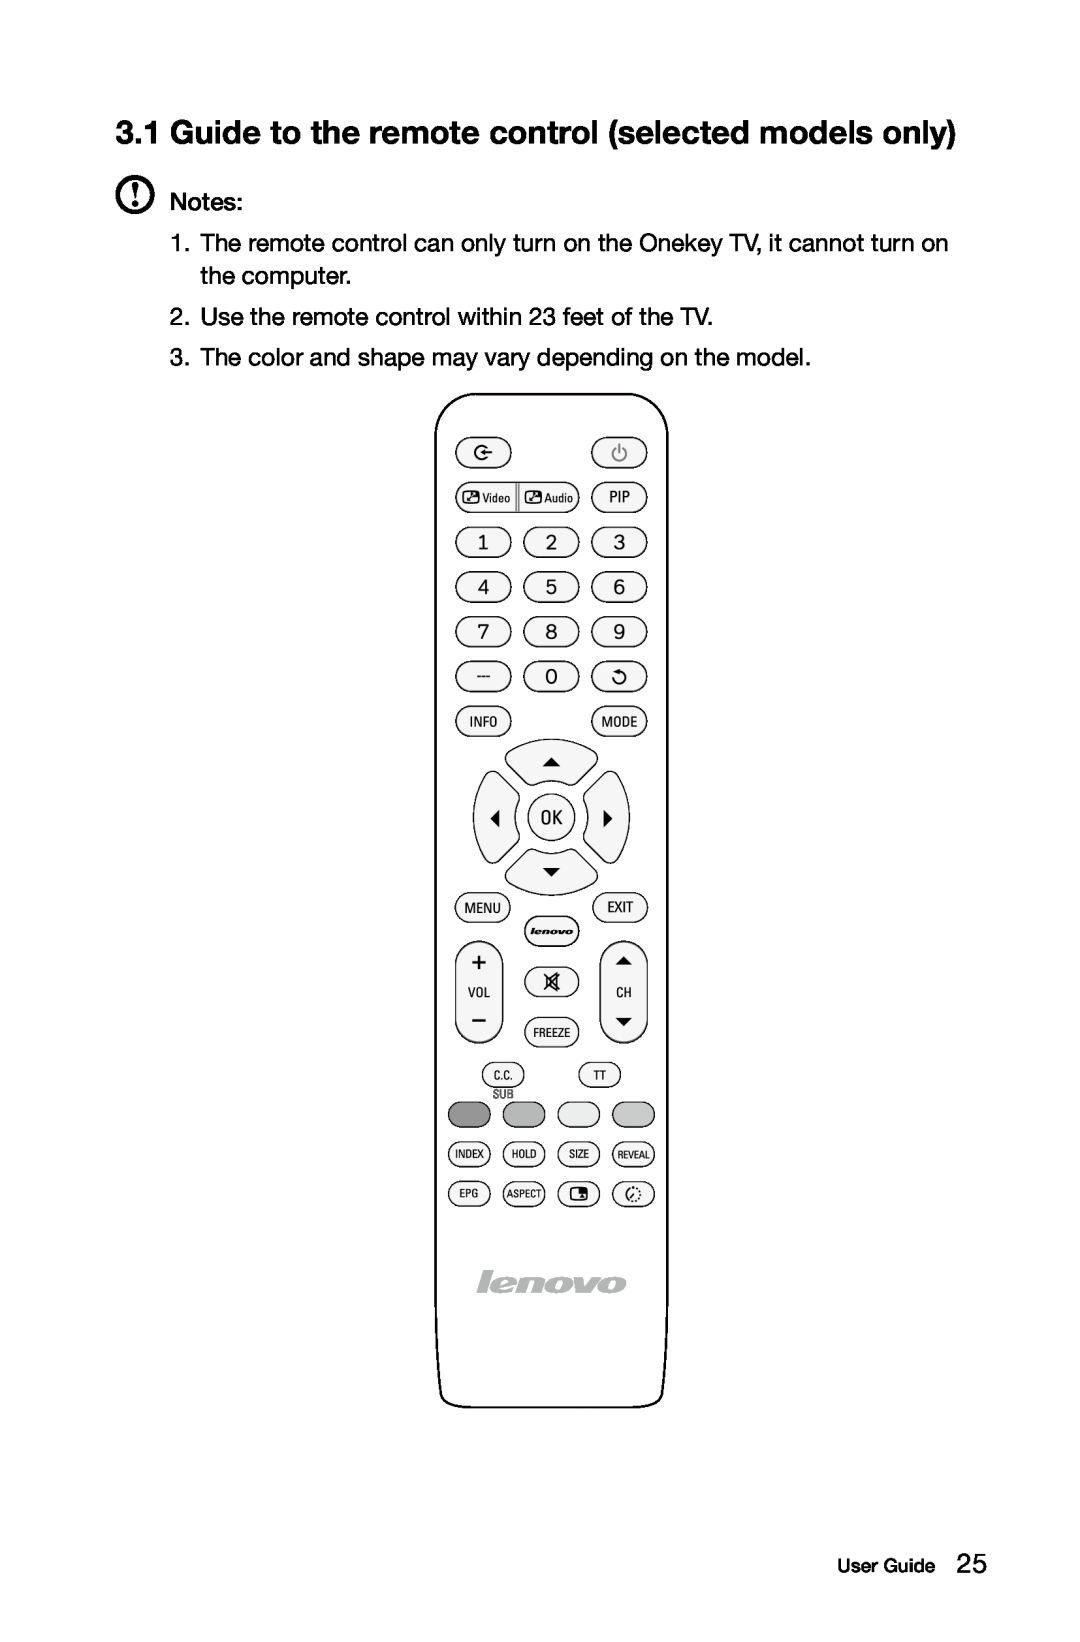 Lenovo 97 Guide to the remote control selected models only, Use the remote control within 23 feet of the TV, User Guide 